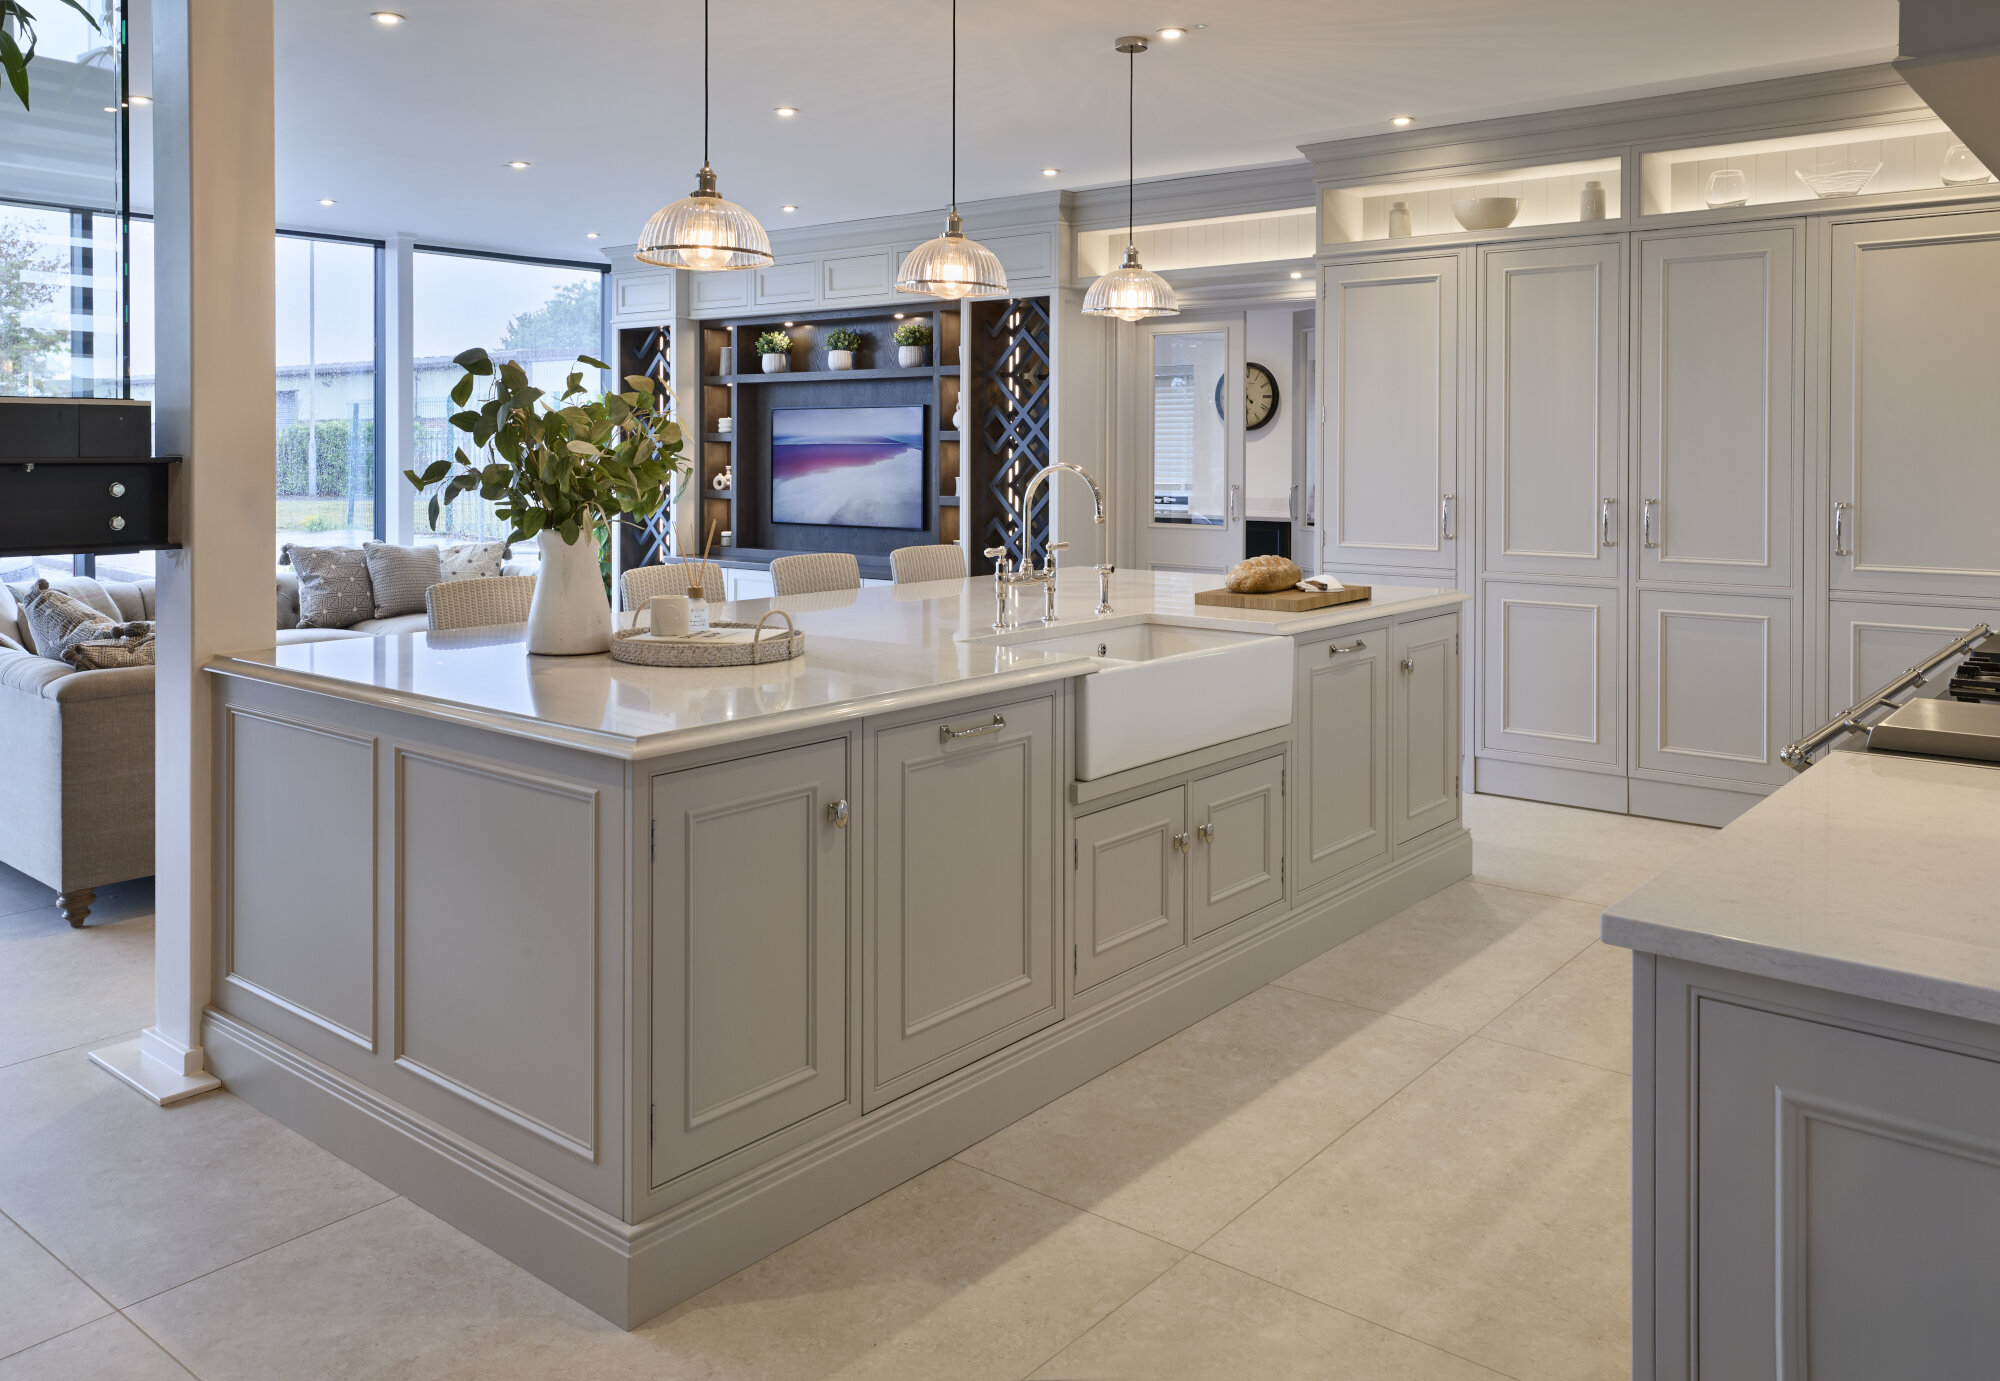 This Bespoke Kitchen Design is on display in our showroom near Louth